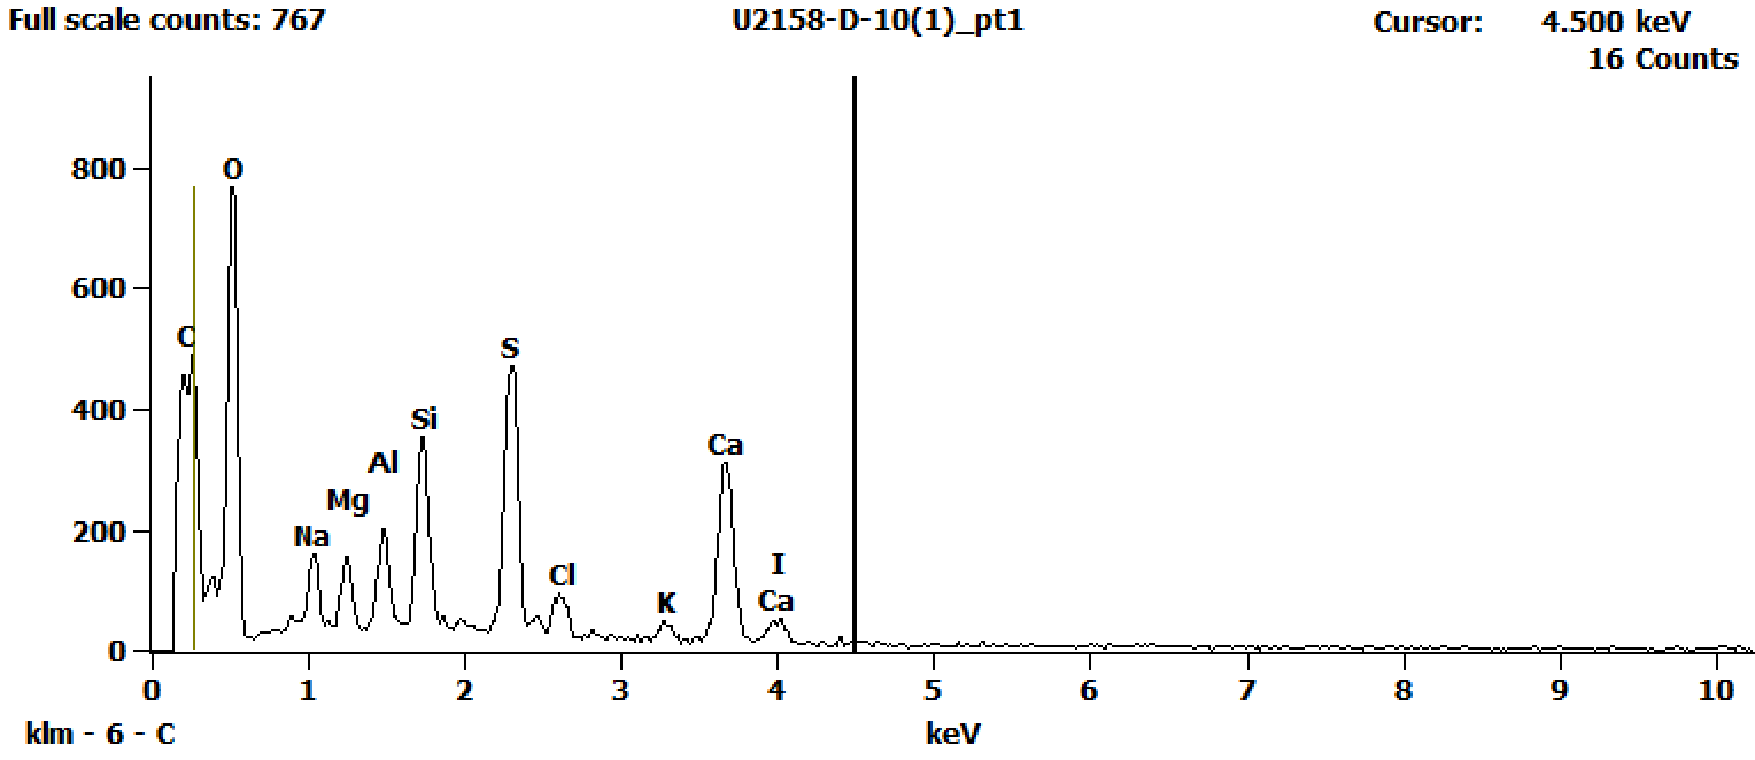 EDS Spectra for sample U2158-D-10 taken at test area 1. The test area is labeled in the particle SEM photo.